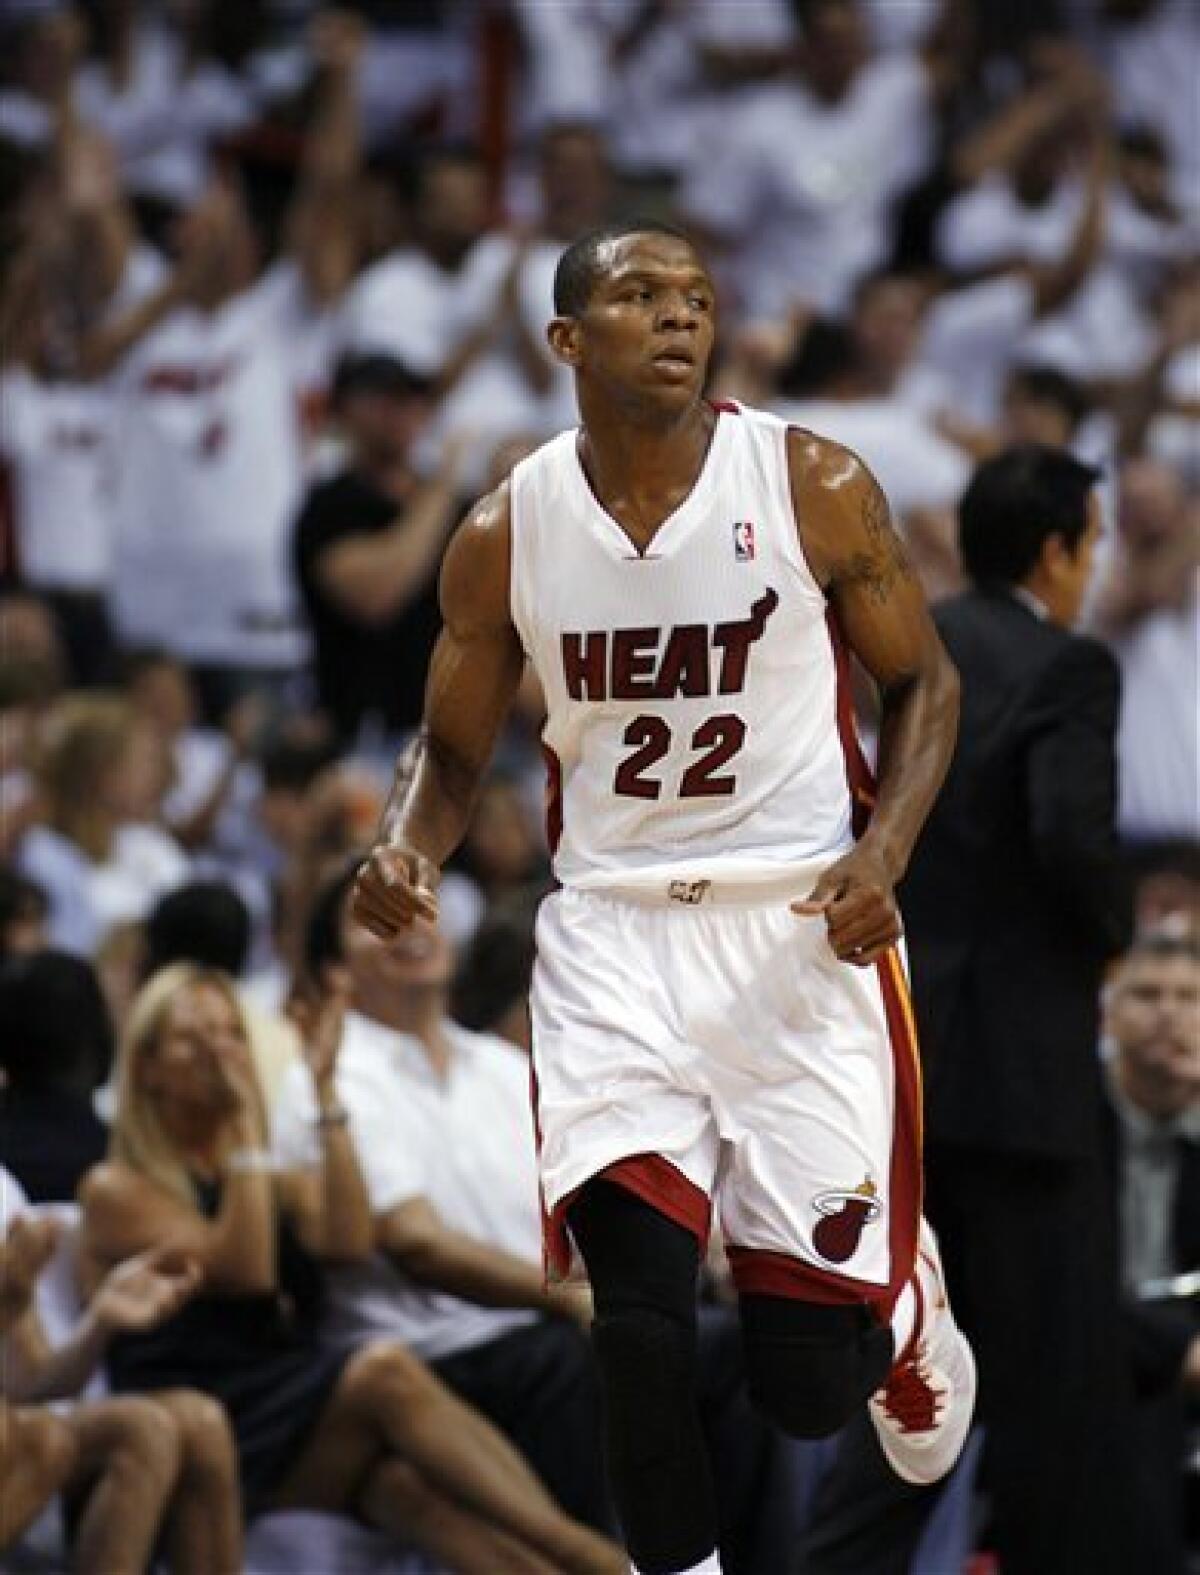 Ray Allen signs with Heat after reported 'rift' with Celtics